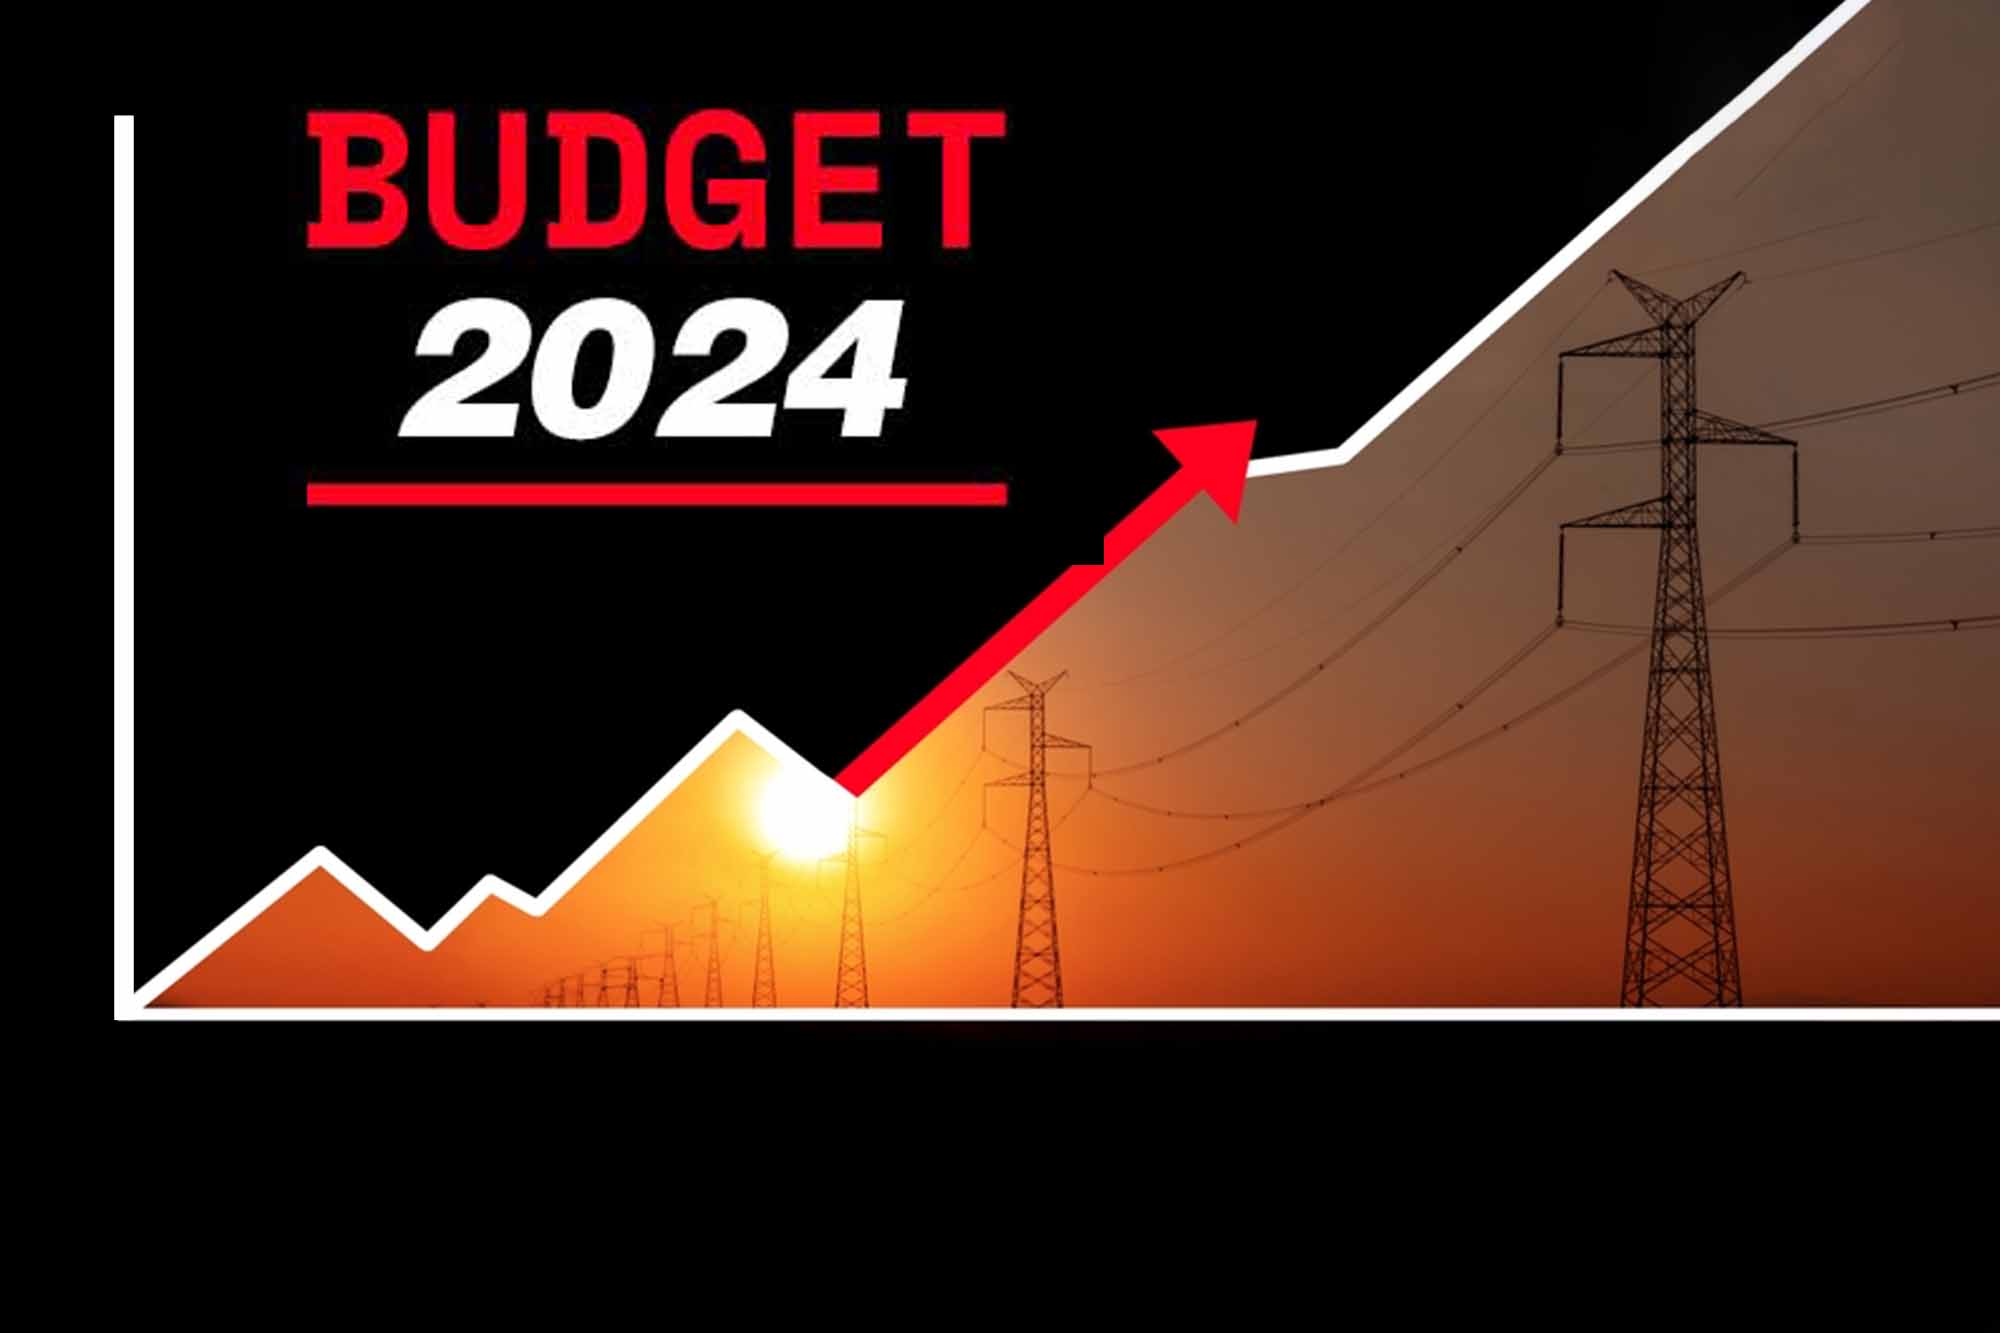 Budget 2024 promises to achieve RE goals